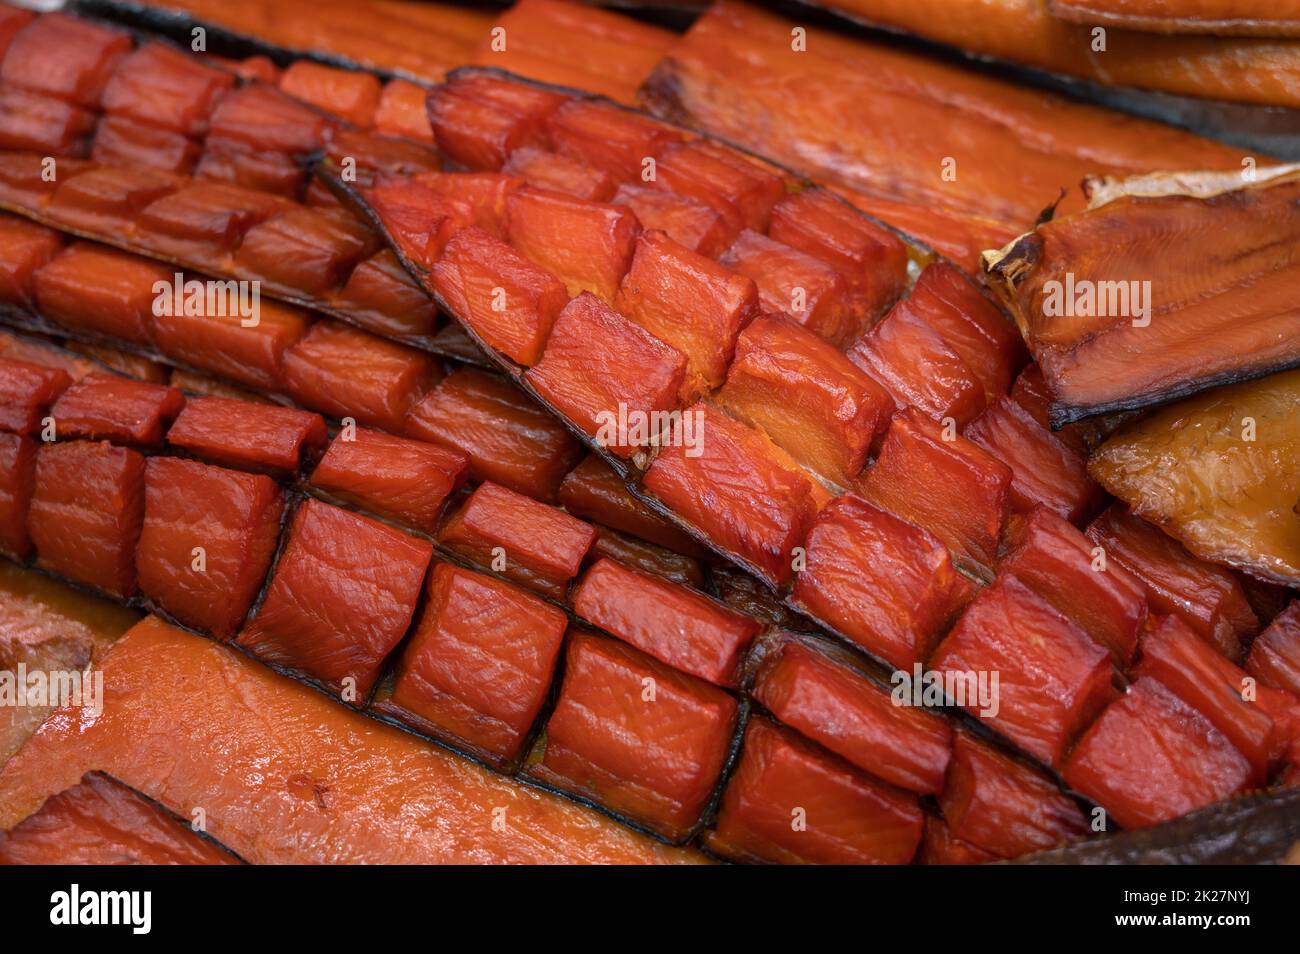 Various smoked fish products Stock Photo